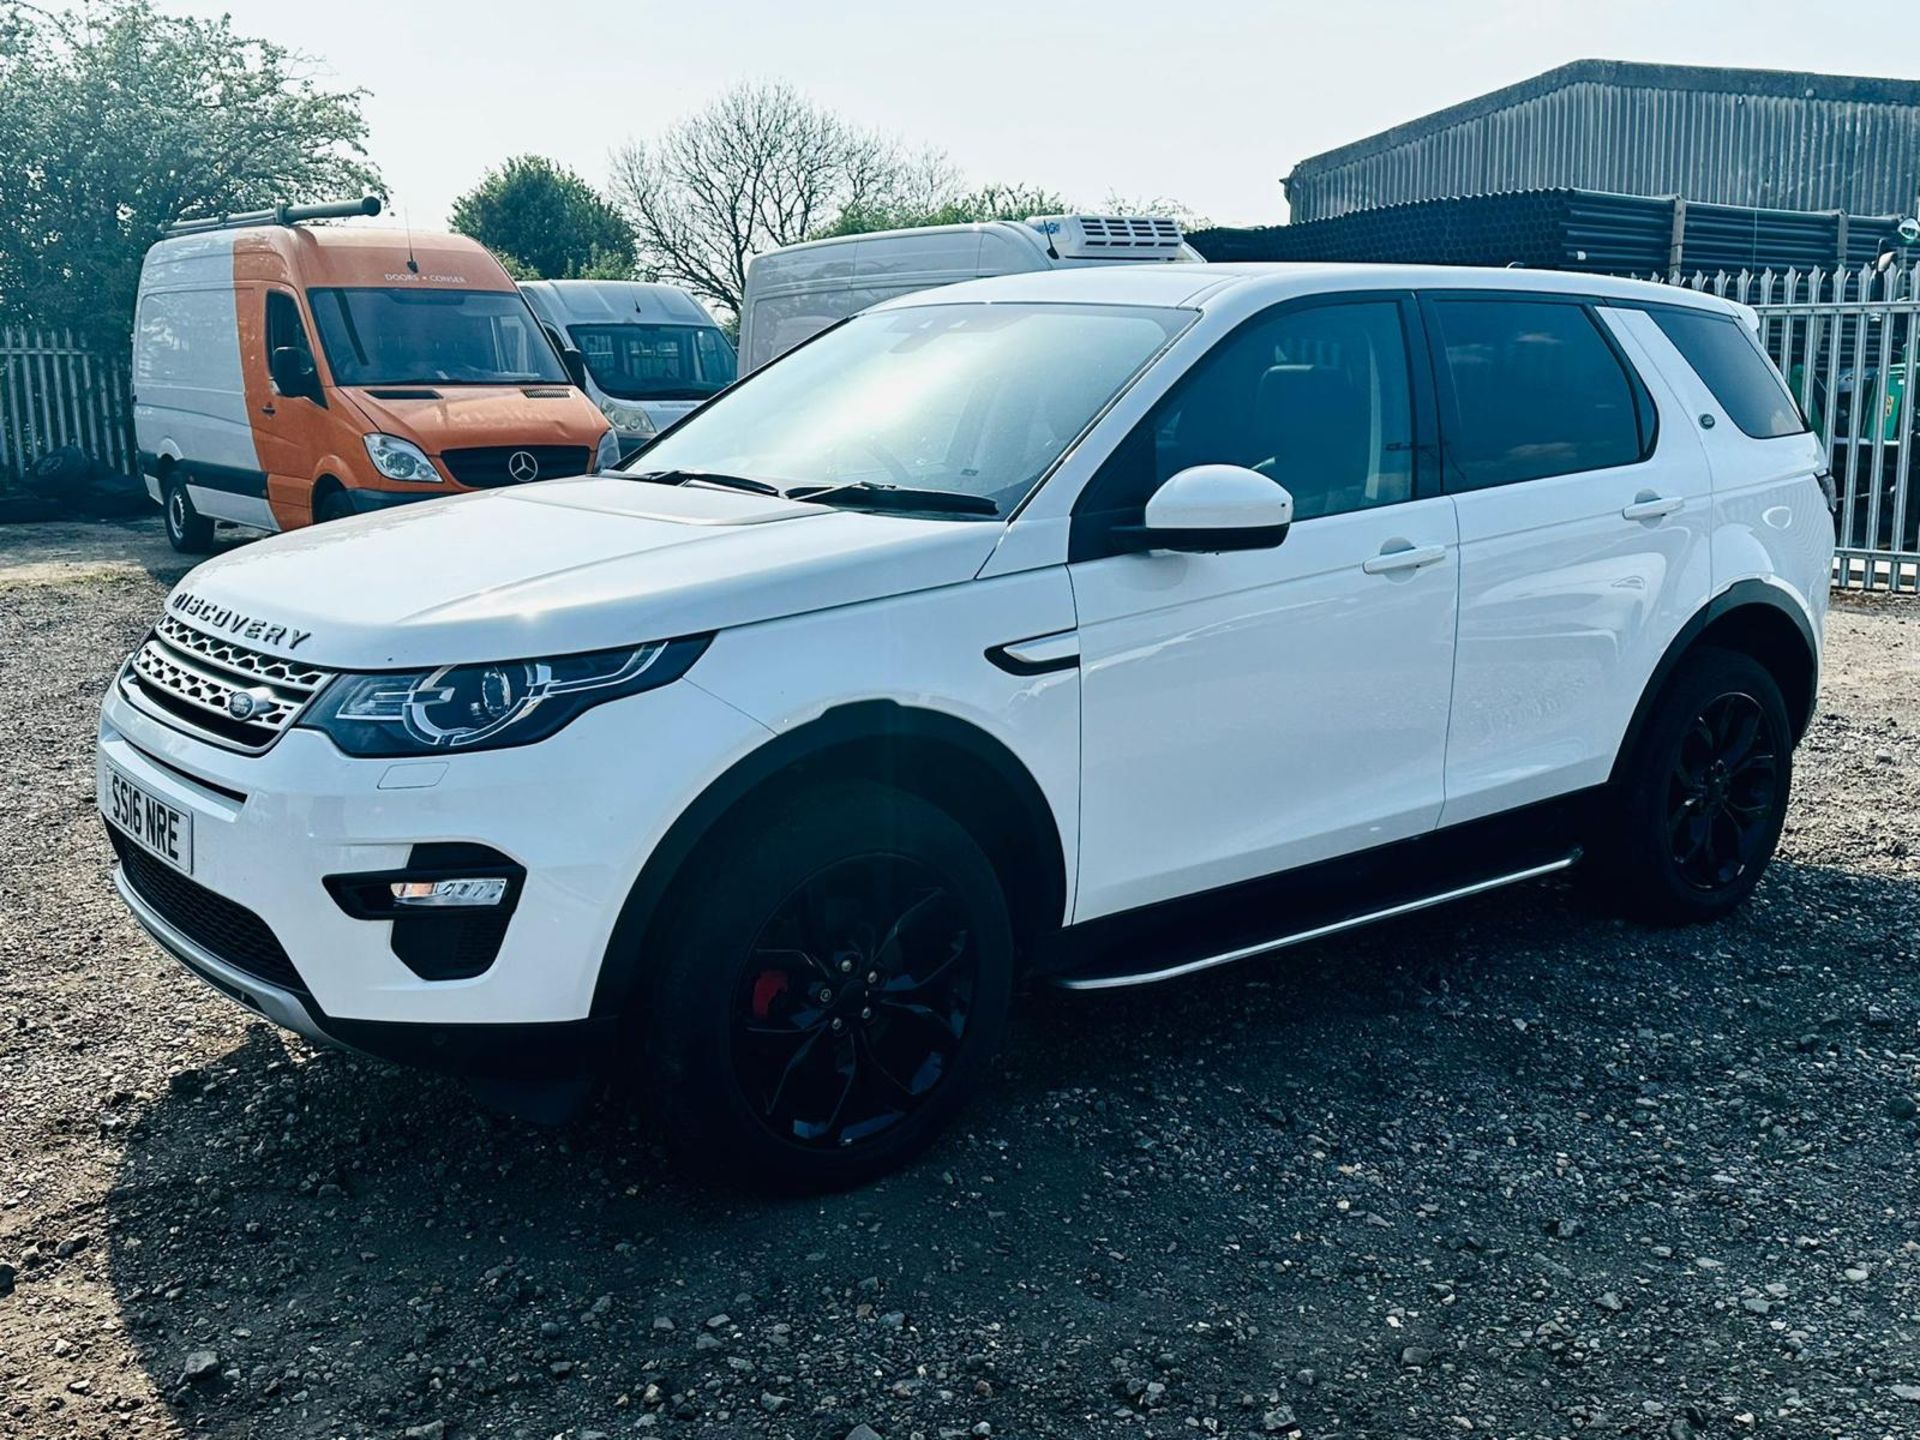 **ON SALE ** Land Rover Discovery Sport 2.0 TD4 180 HSE 2016'16 Reg'- Sat Nav - A/C -7 seats - Image 3 of 23